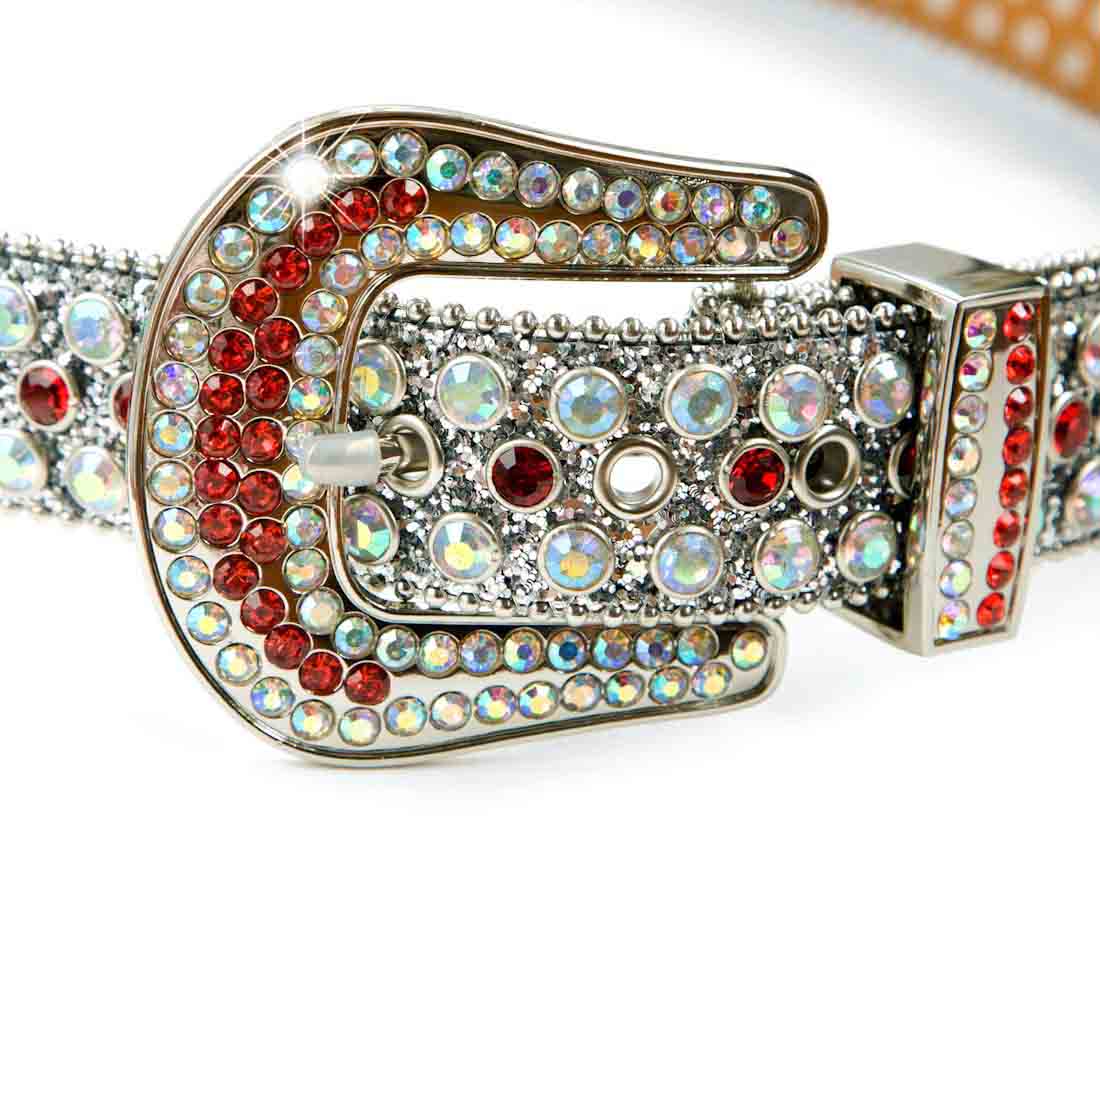 rhinestone belt silver and red with western buckle